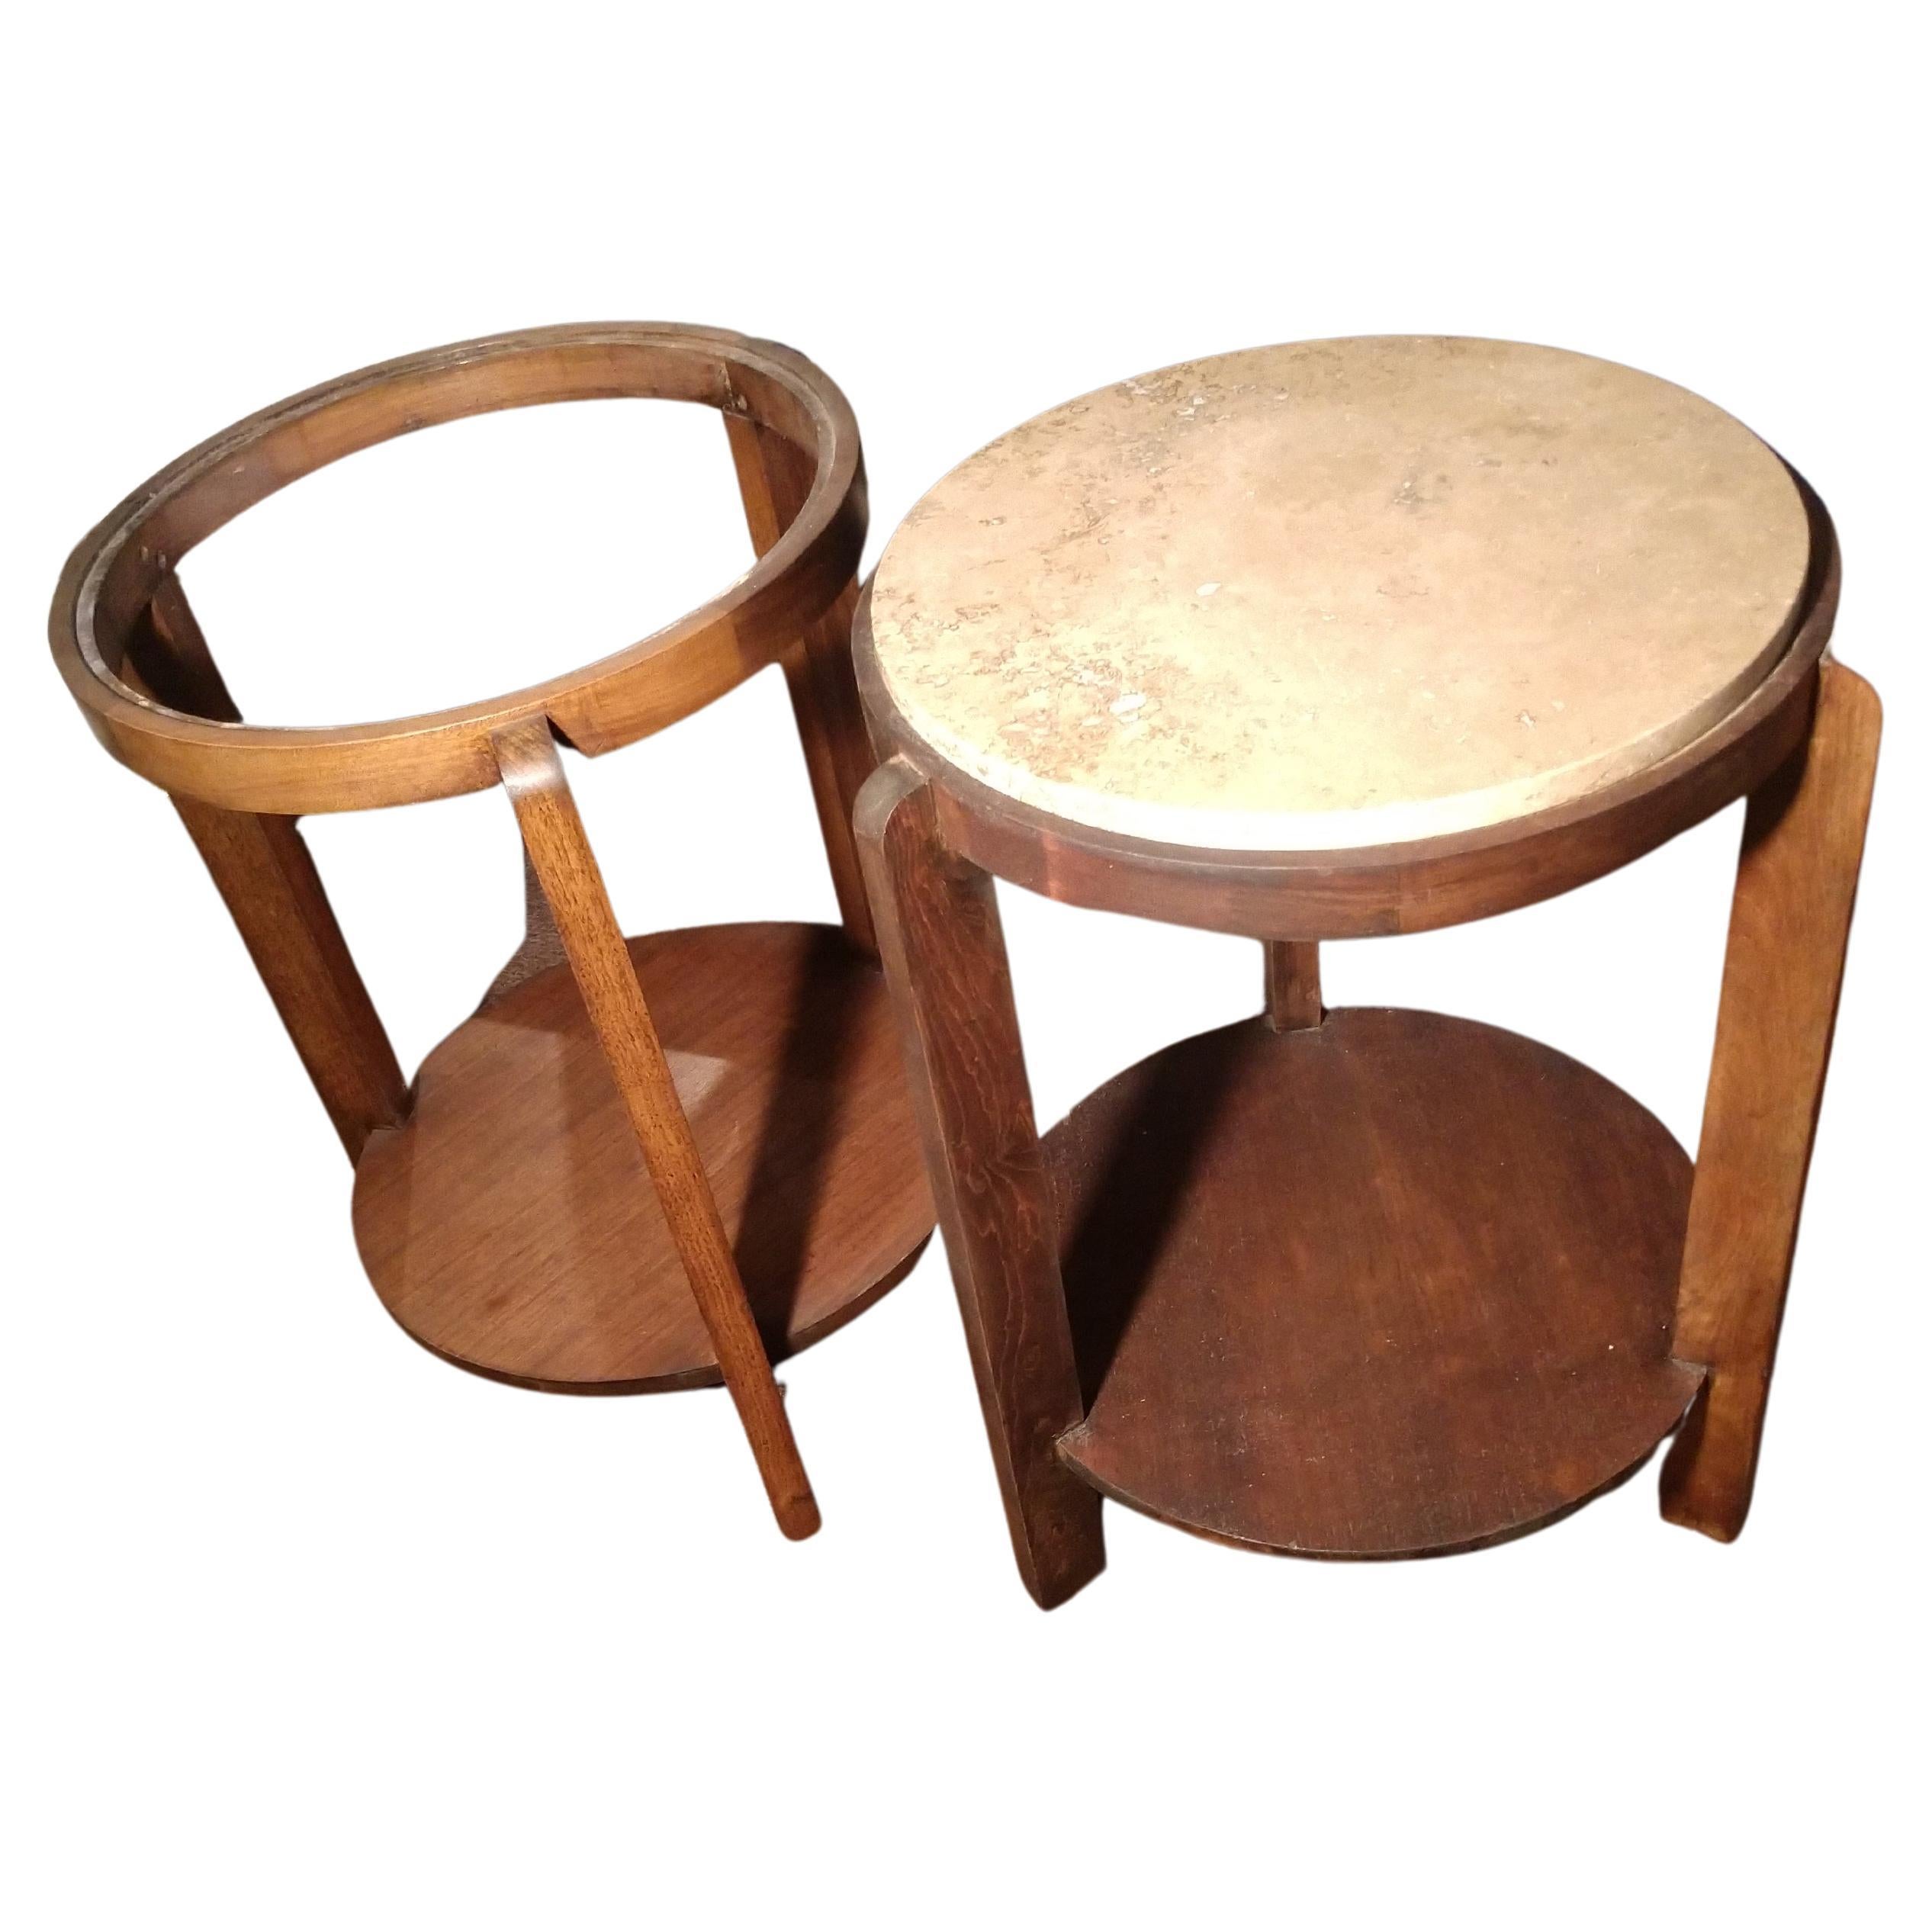 Hand-Crafted Pair of  Art Deco Mid-Century Modern Travertine & Walnut Gueridon End Tables For Sale